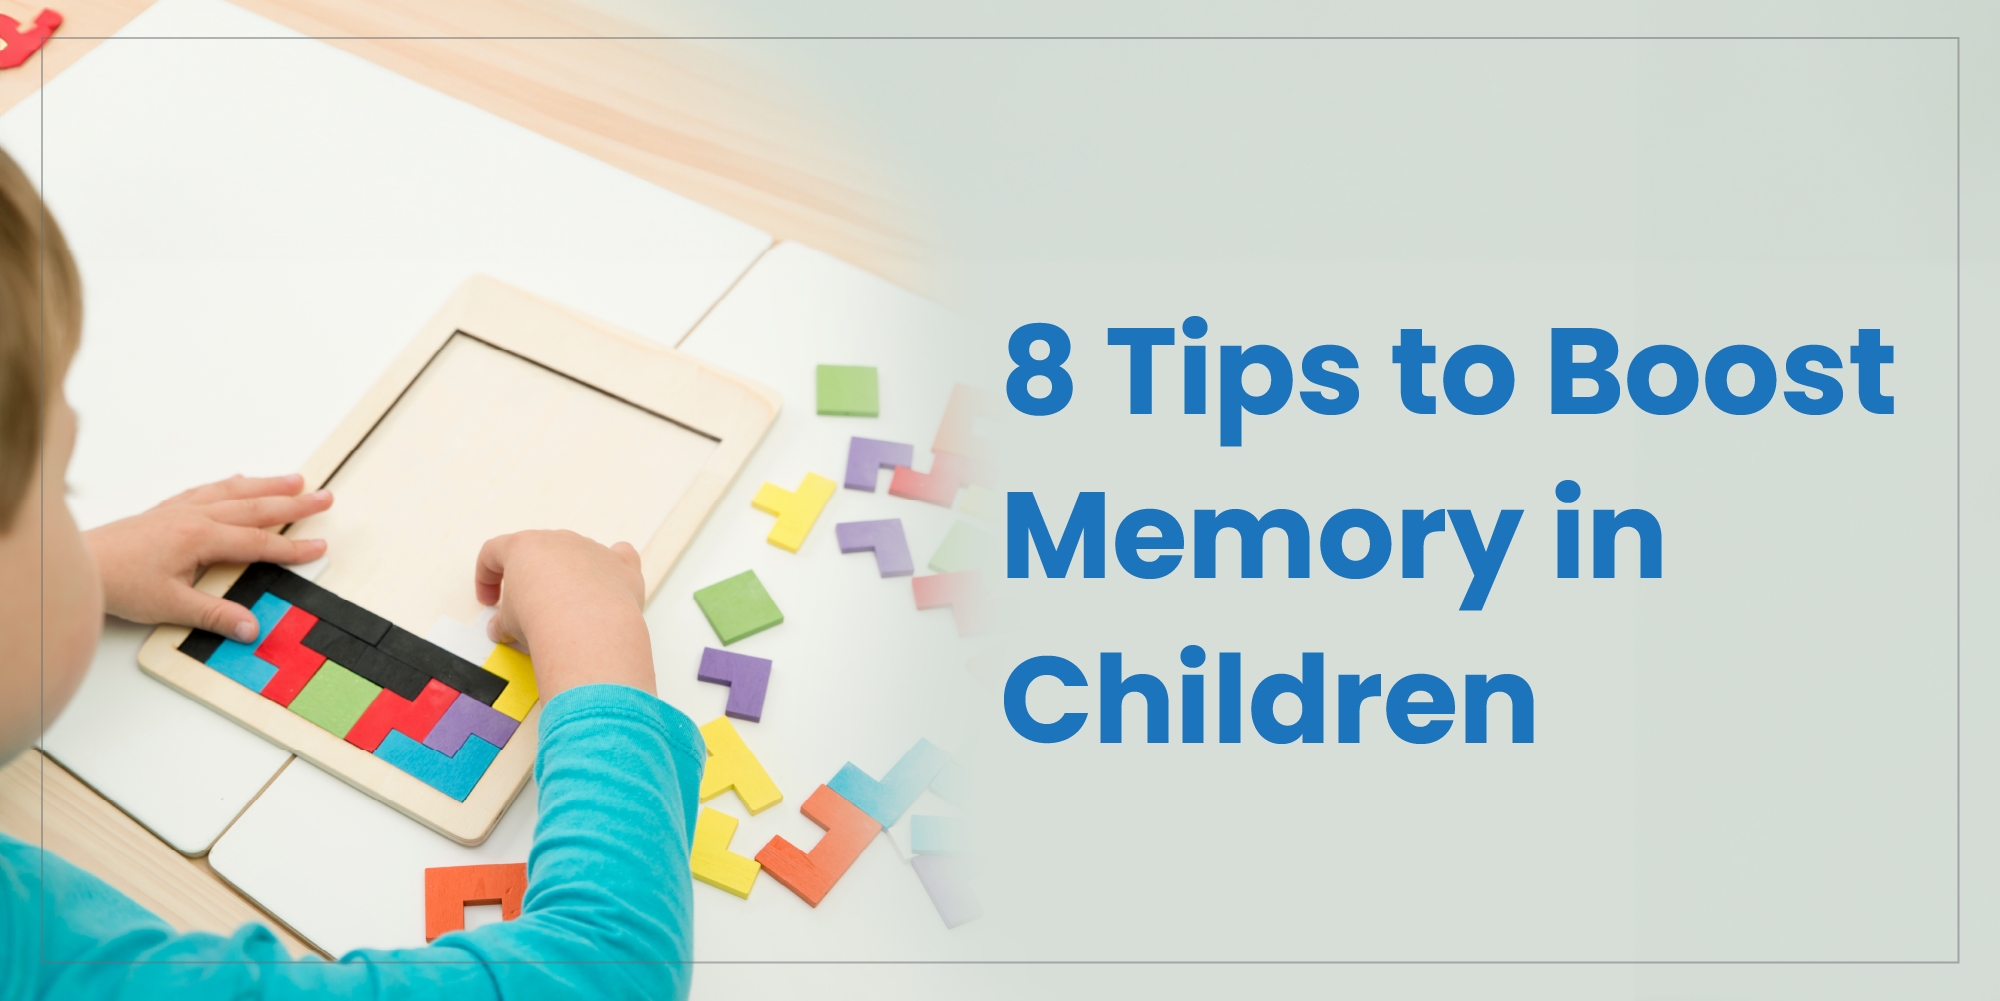 8 Tips to Boost Your Child’s Memory